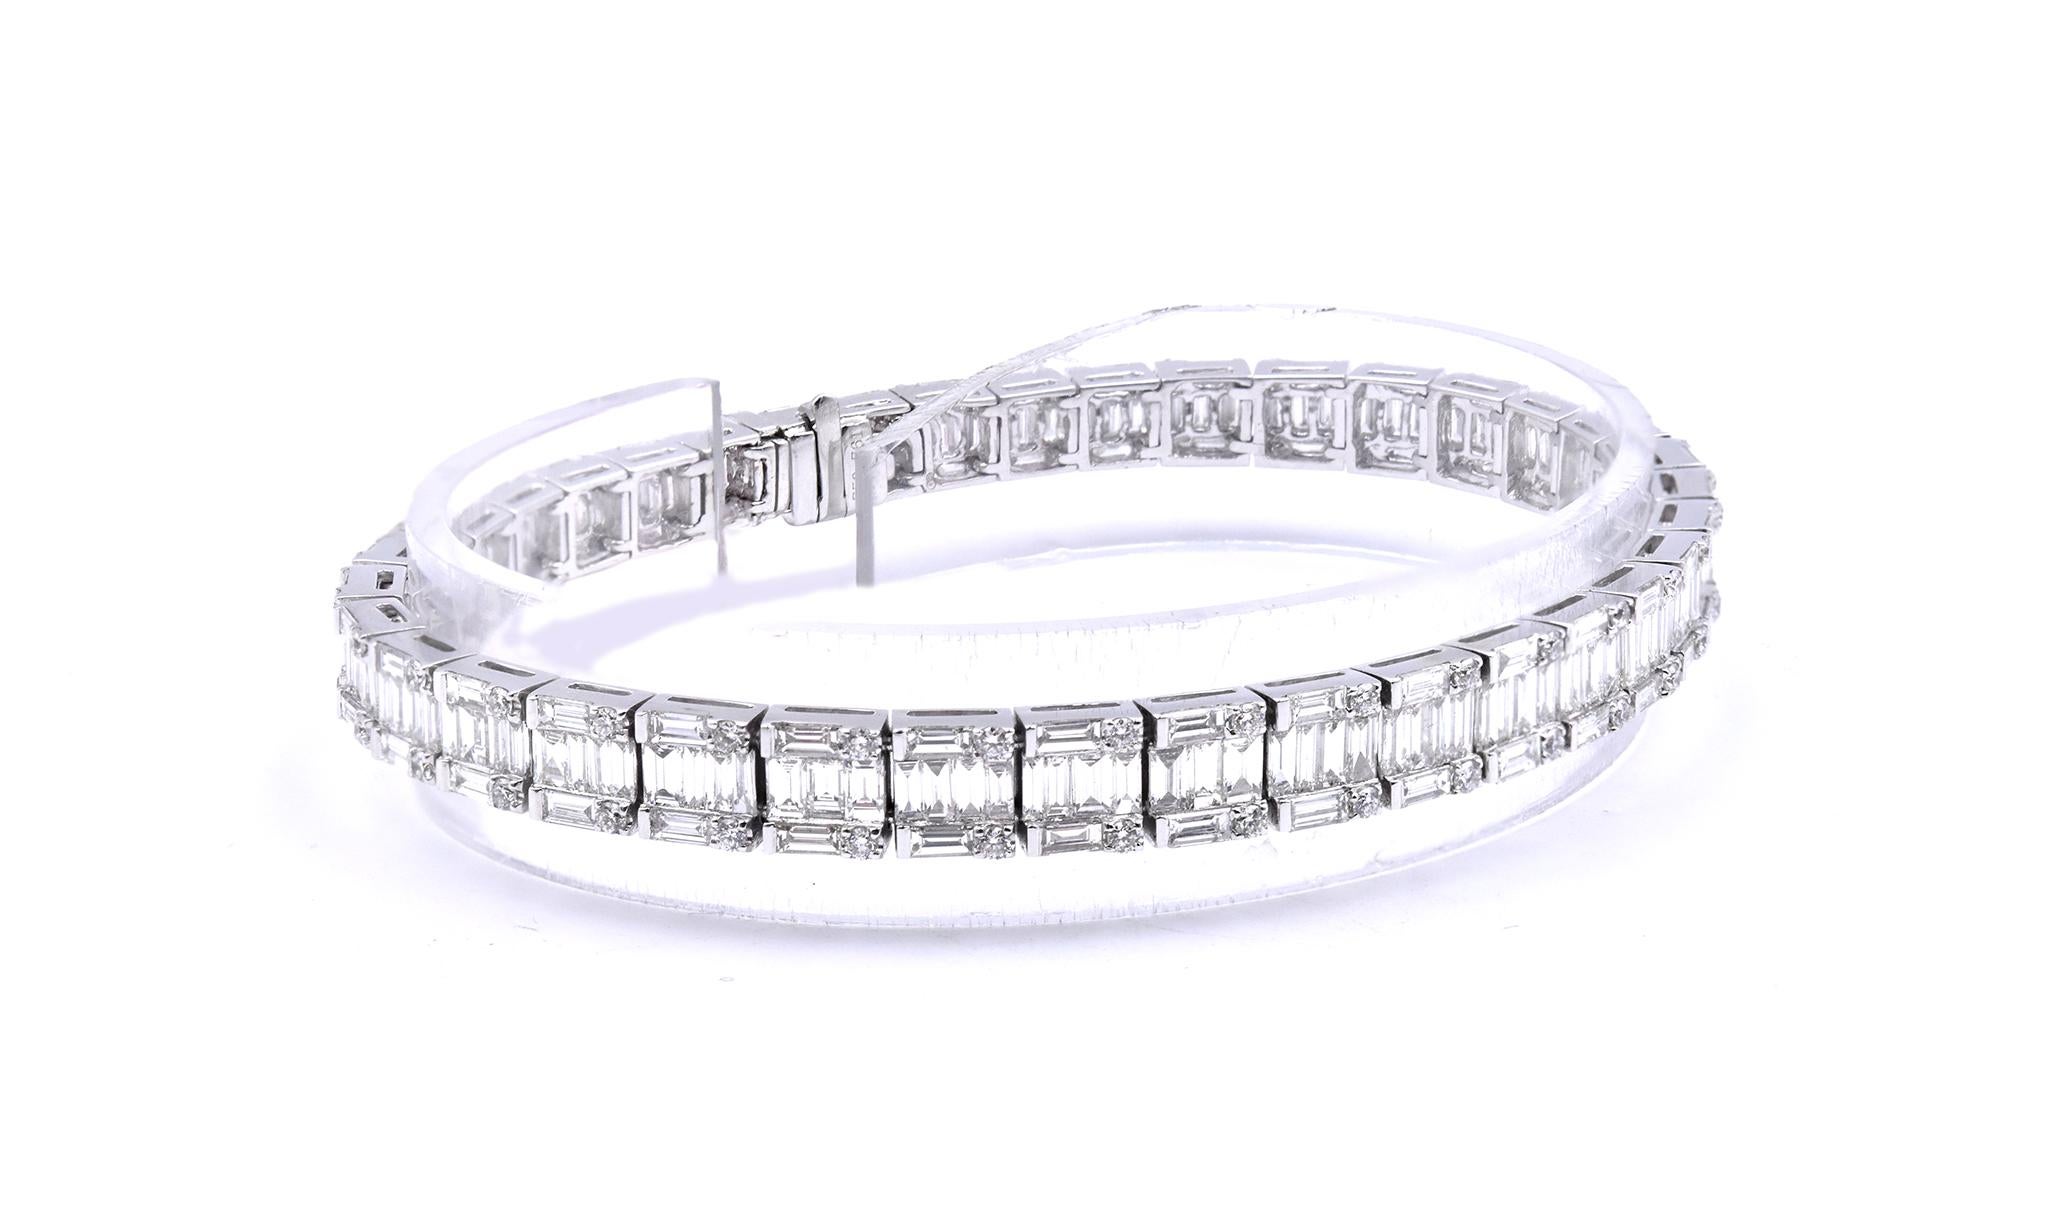 Material: 18K white gold
Diamonds: 72 round cut = .80cttw
Color: G
Clarity: VS1
Diamonds: 213 baguette cut =6.96cttw
Color:  G
Clarity: VS1
Dimensions: bracelet will fit up to a 7-inch wrist
Weight: 17.41 grams
